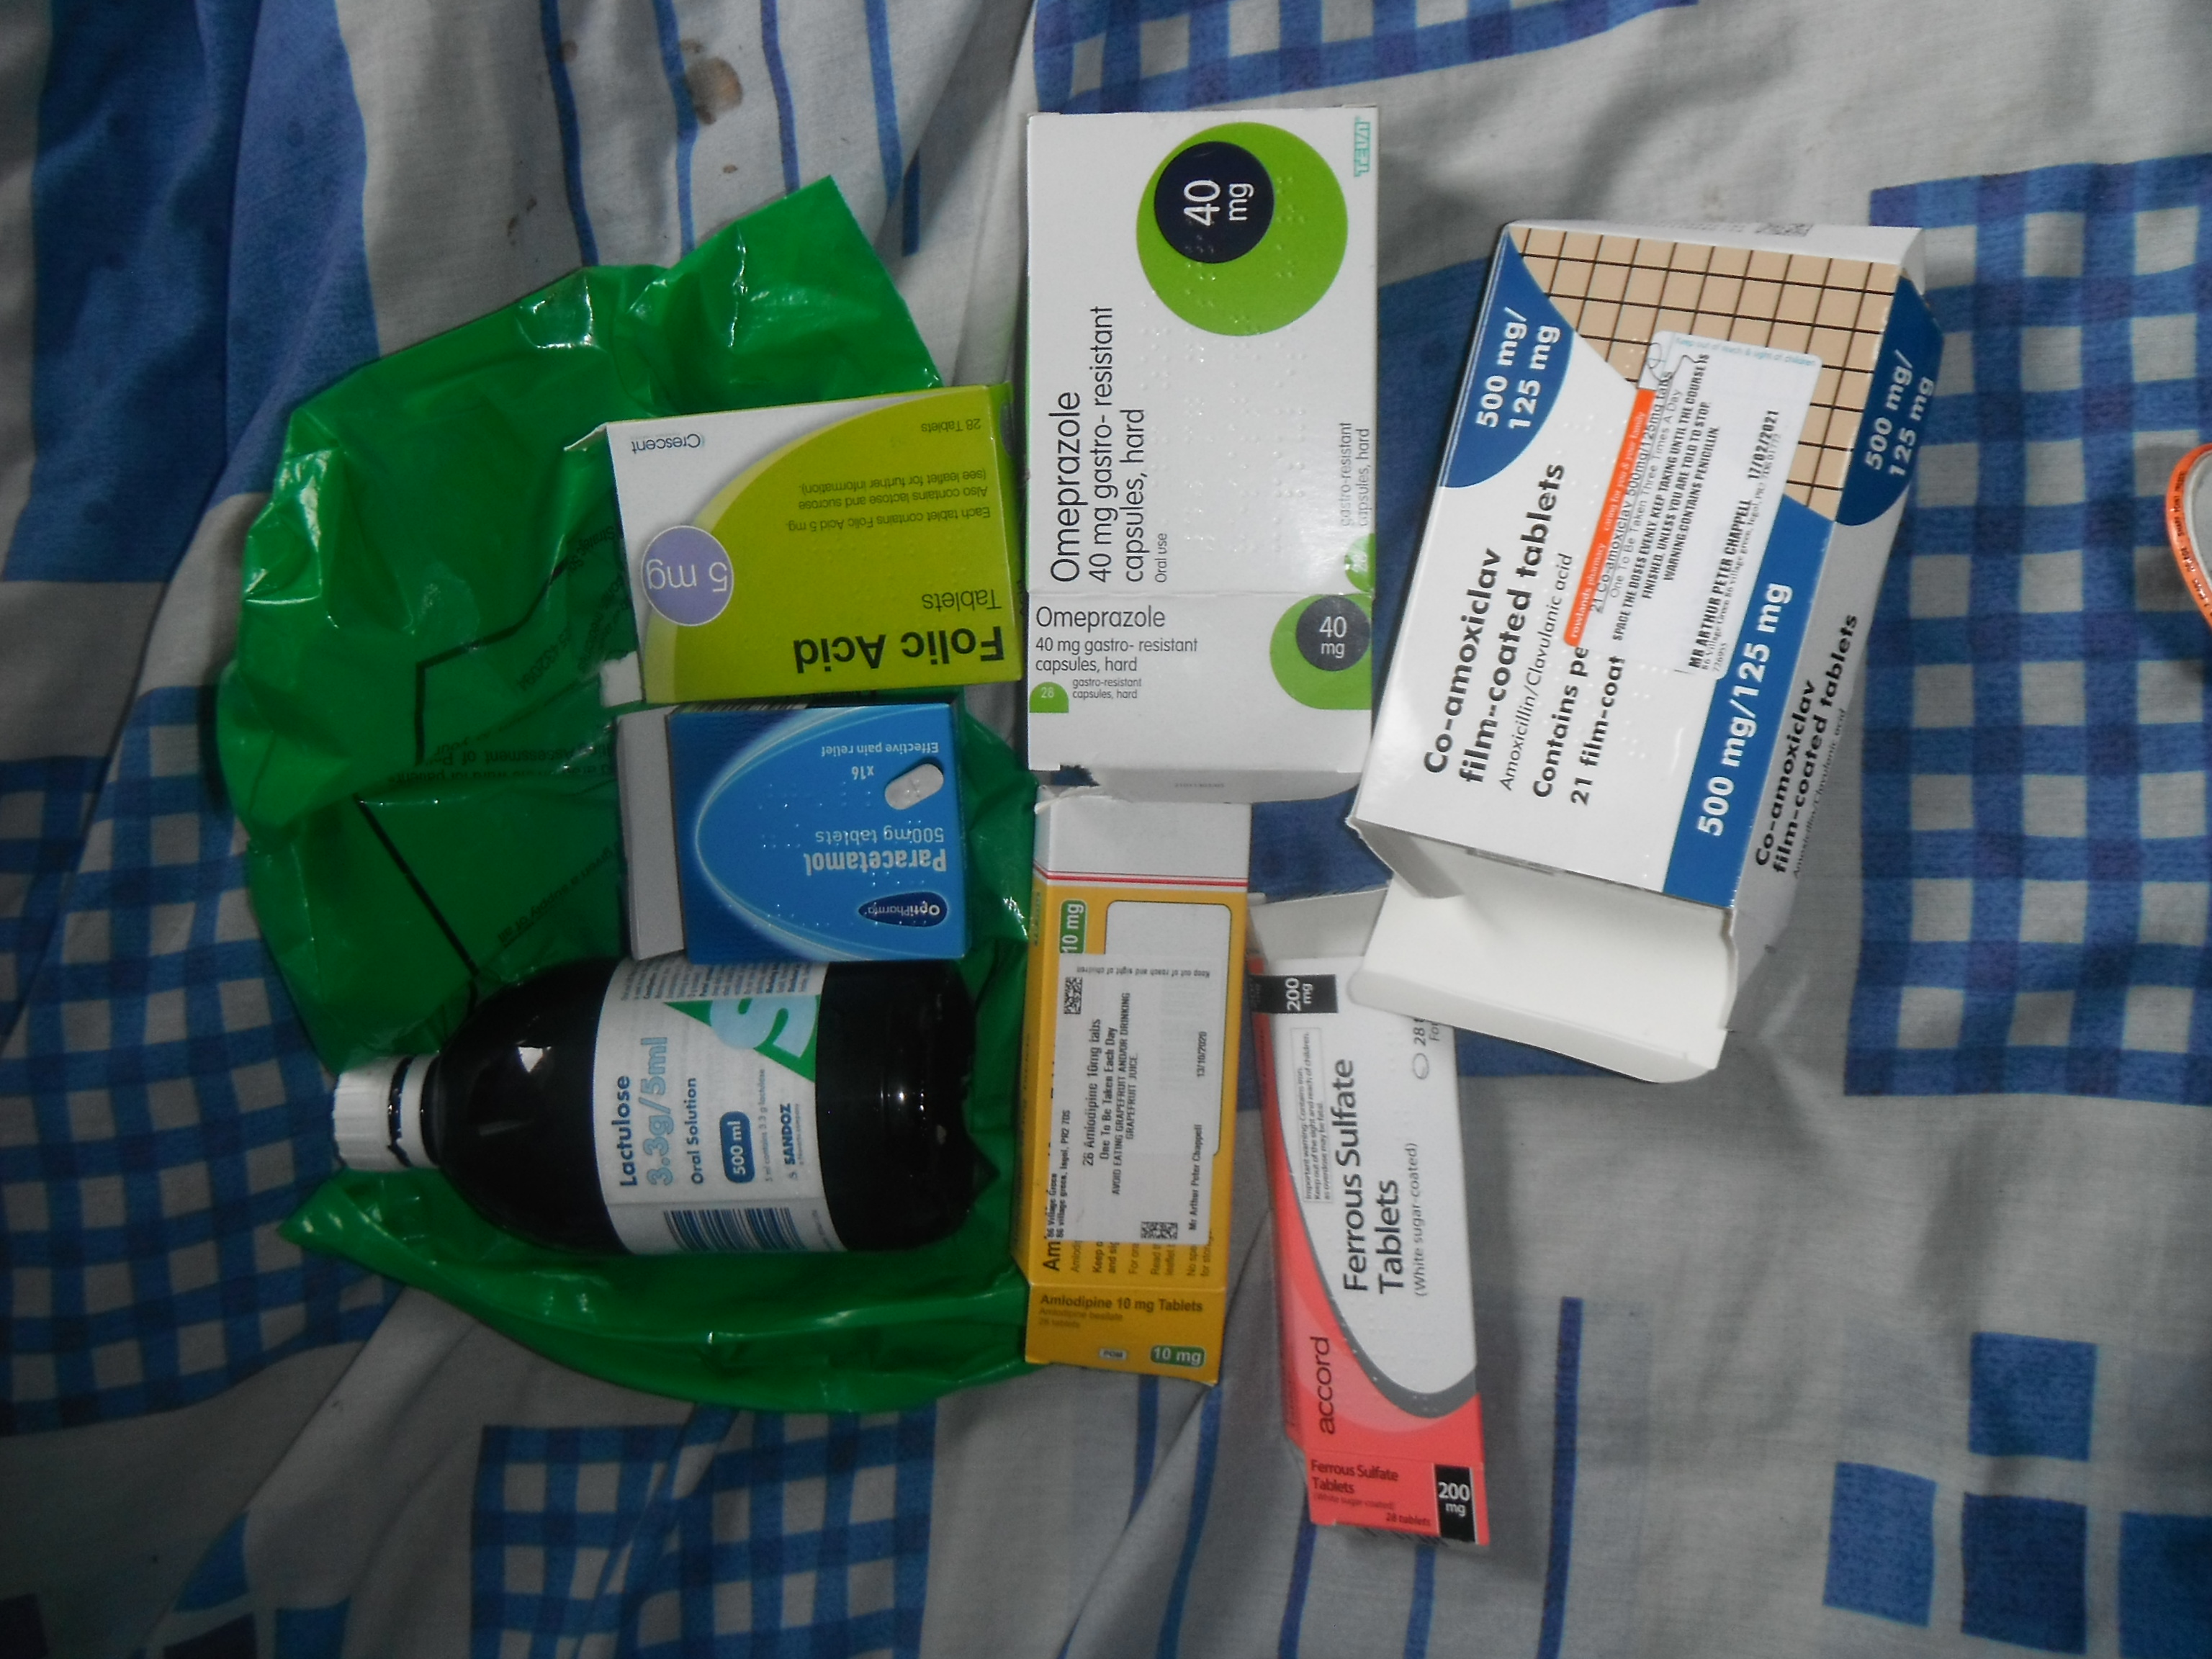 Photo taken by me - some of my medications 